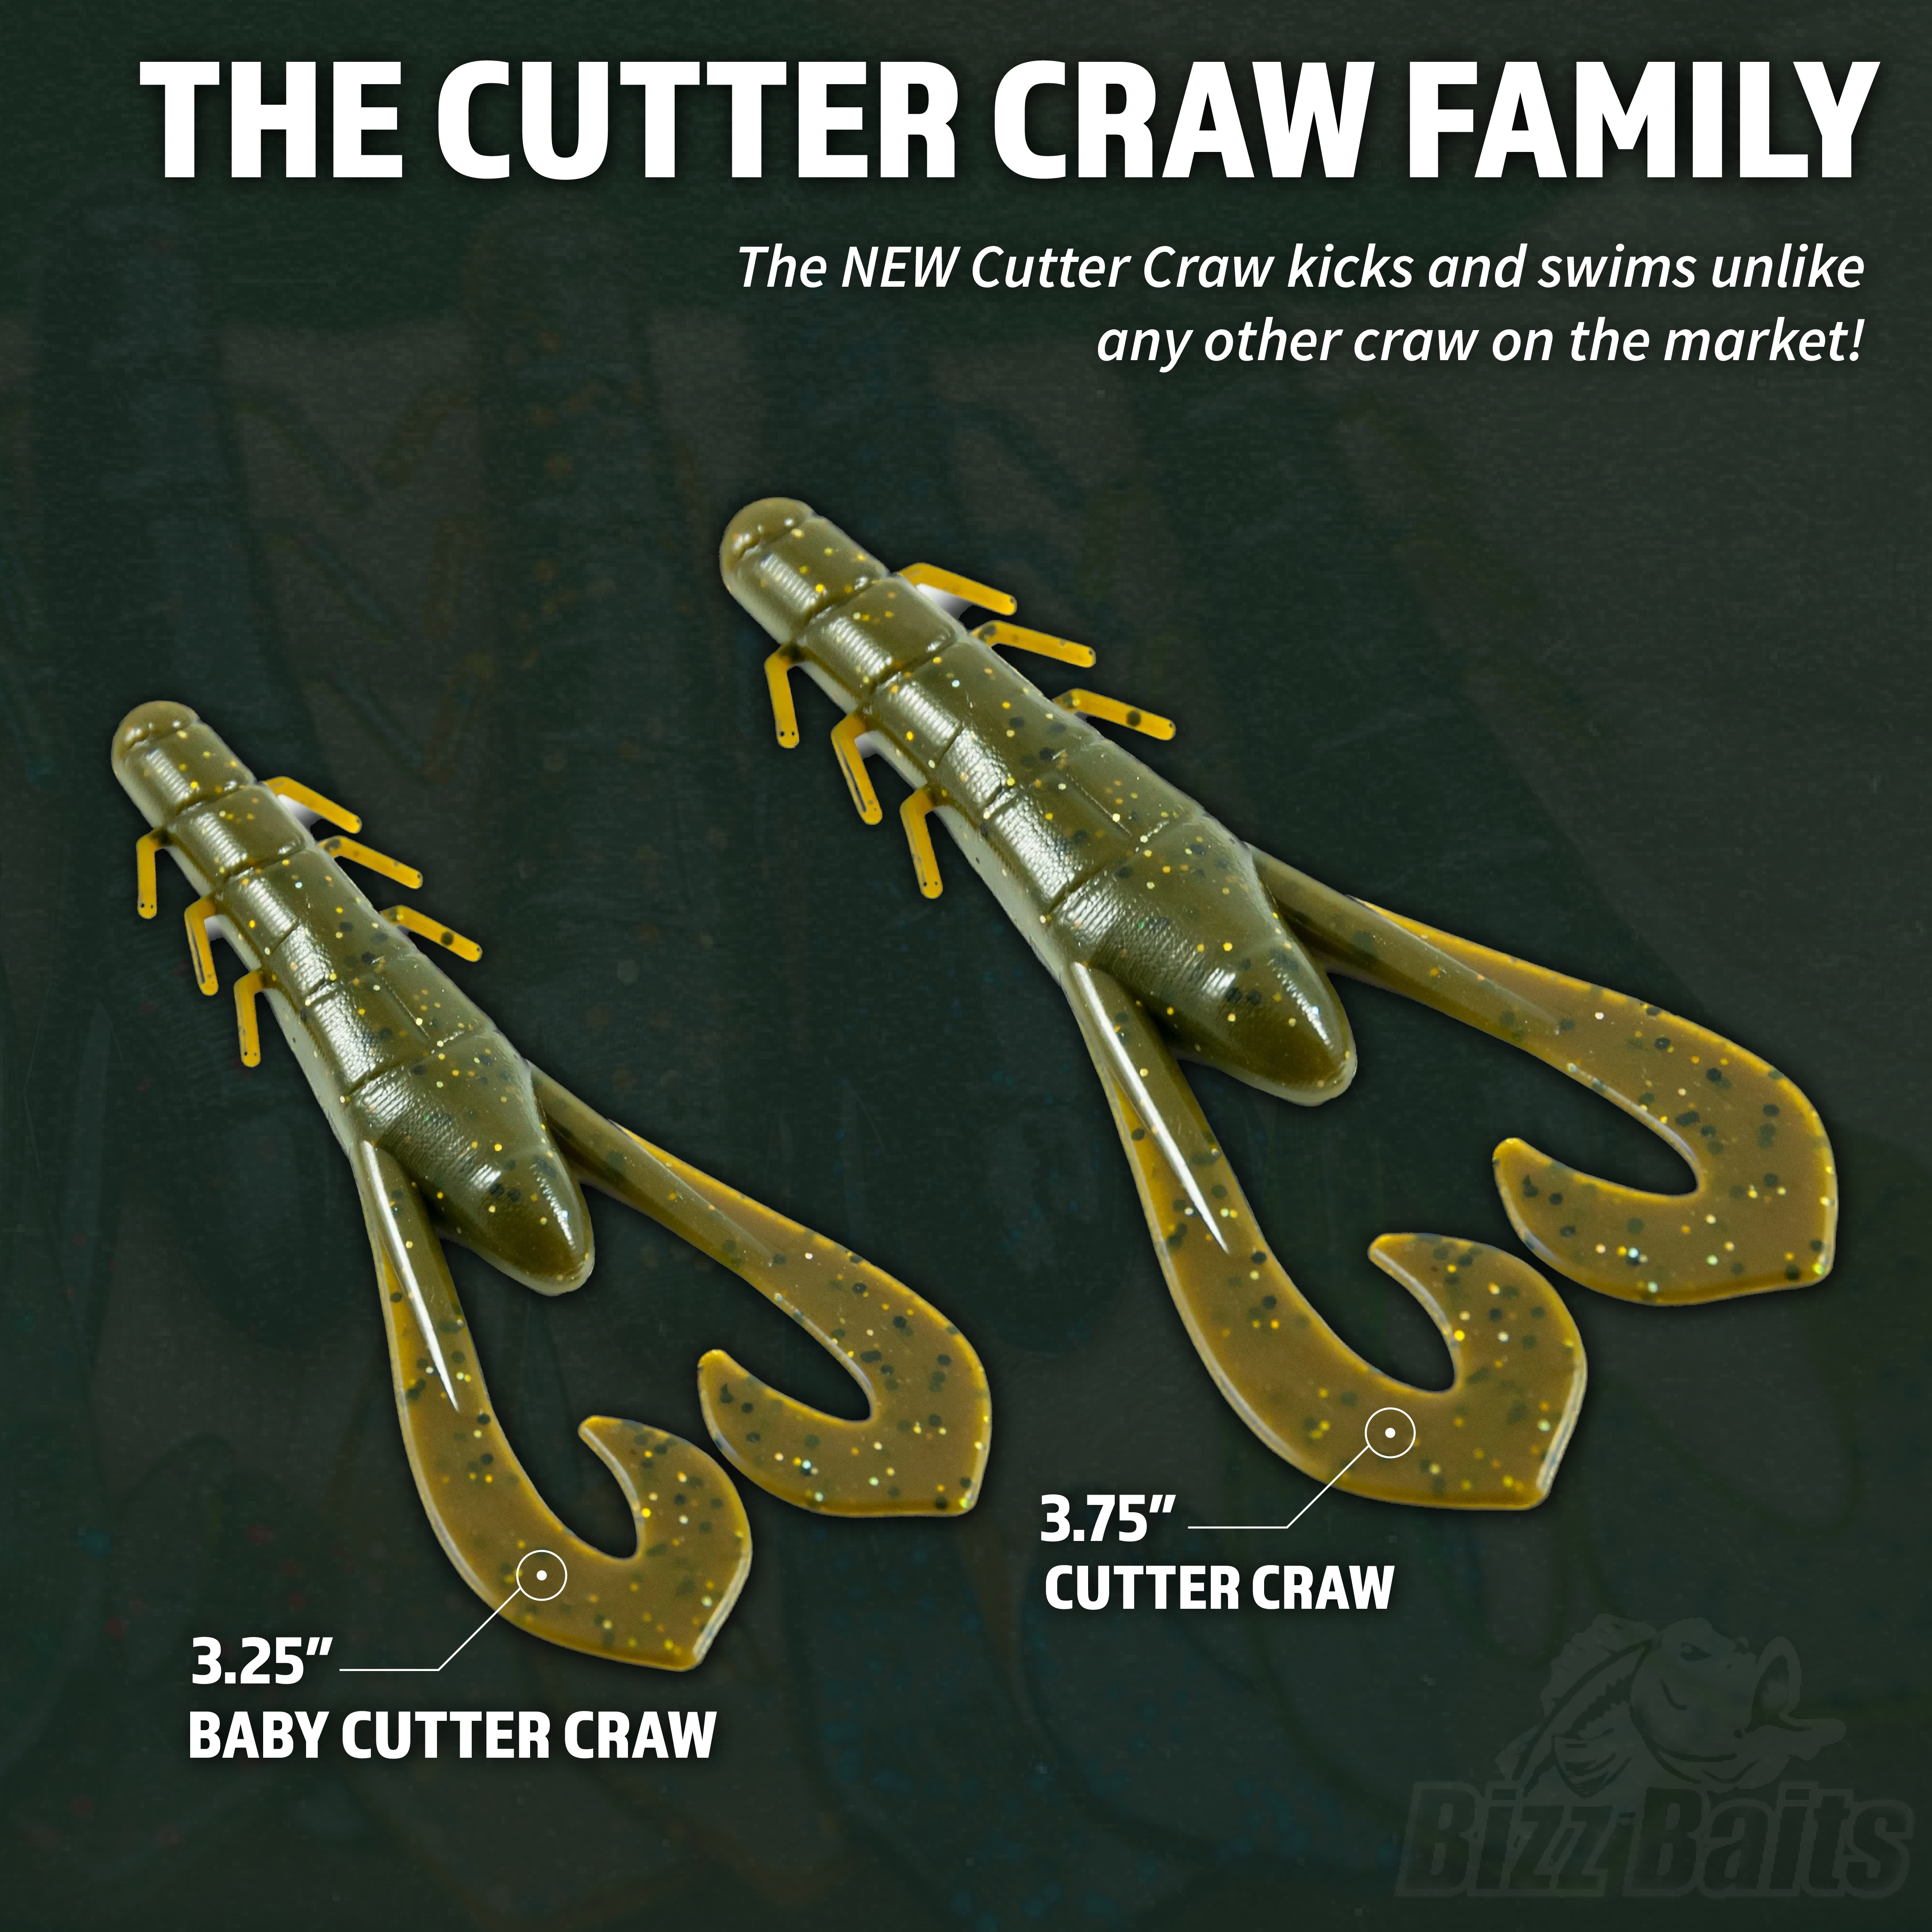 Baby Cutter Craw